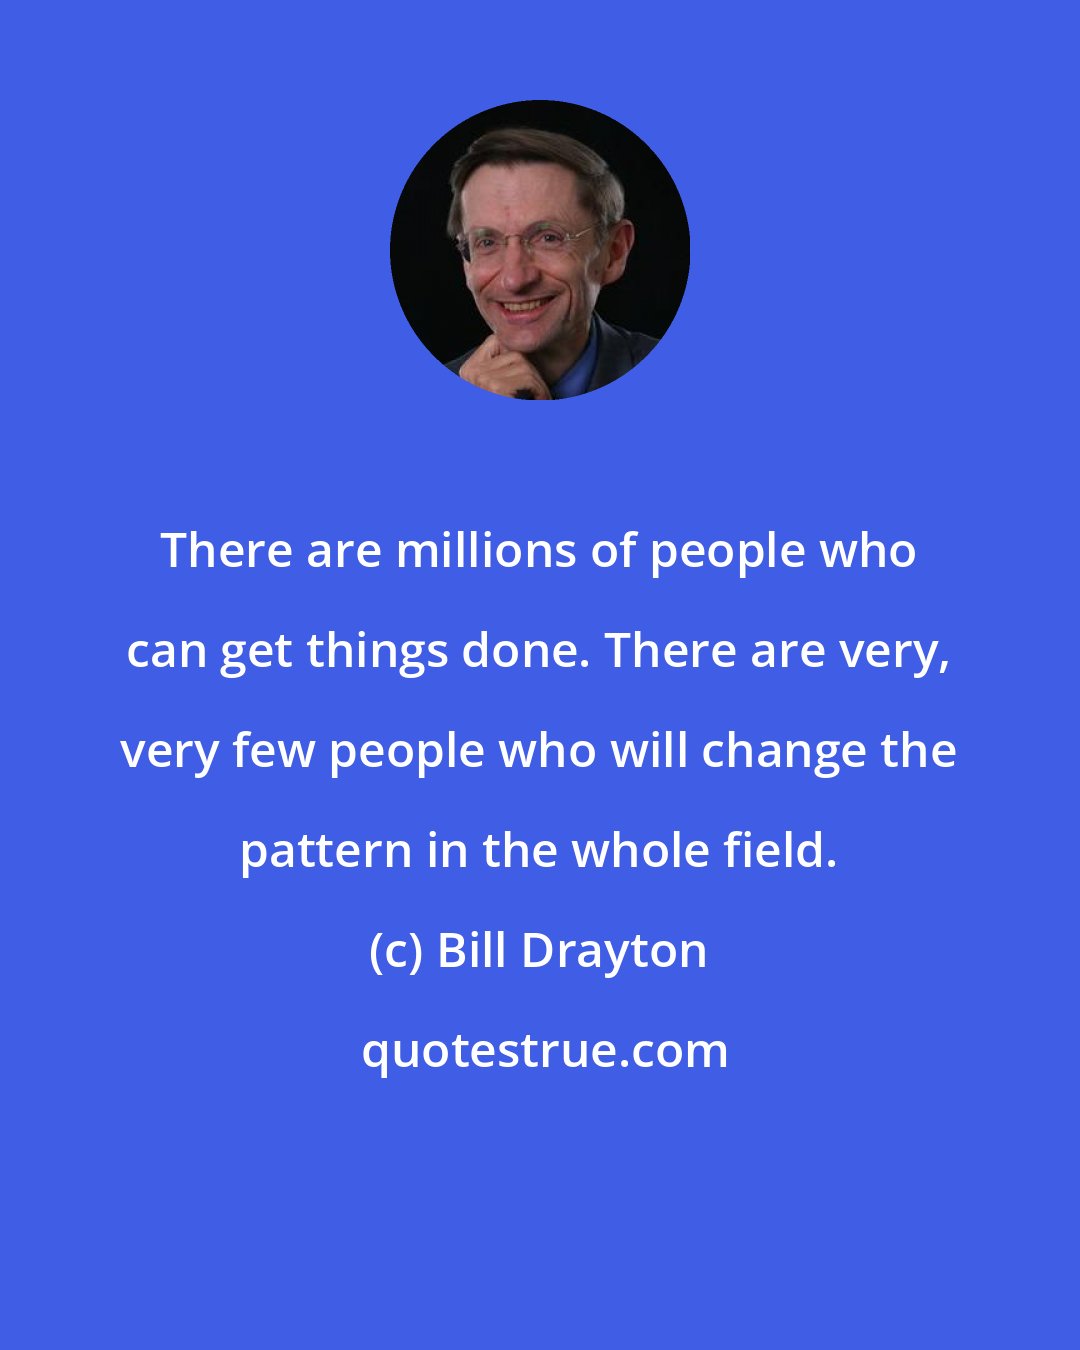 Bill Drayton: There are millions of people who can get things done. There are very, very few people who will change the pattern in the whole field.